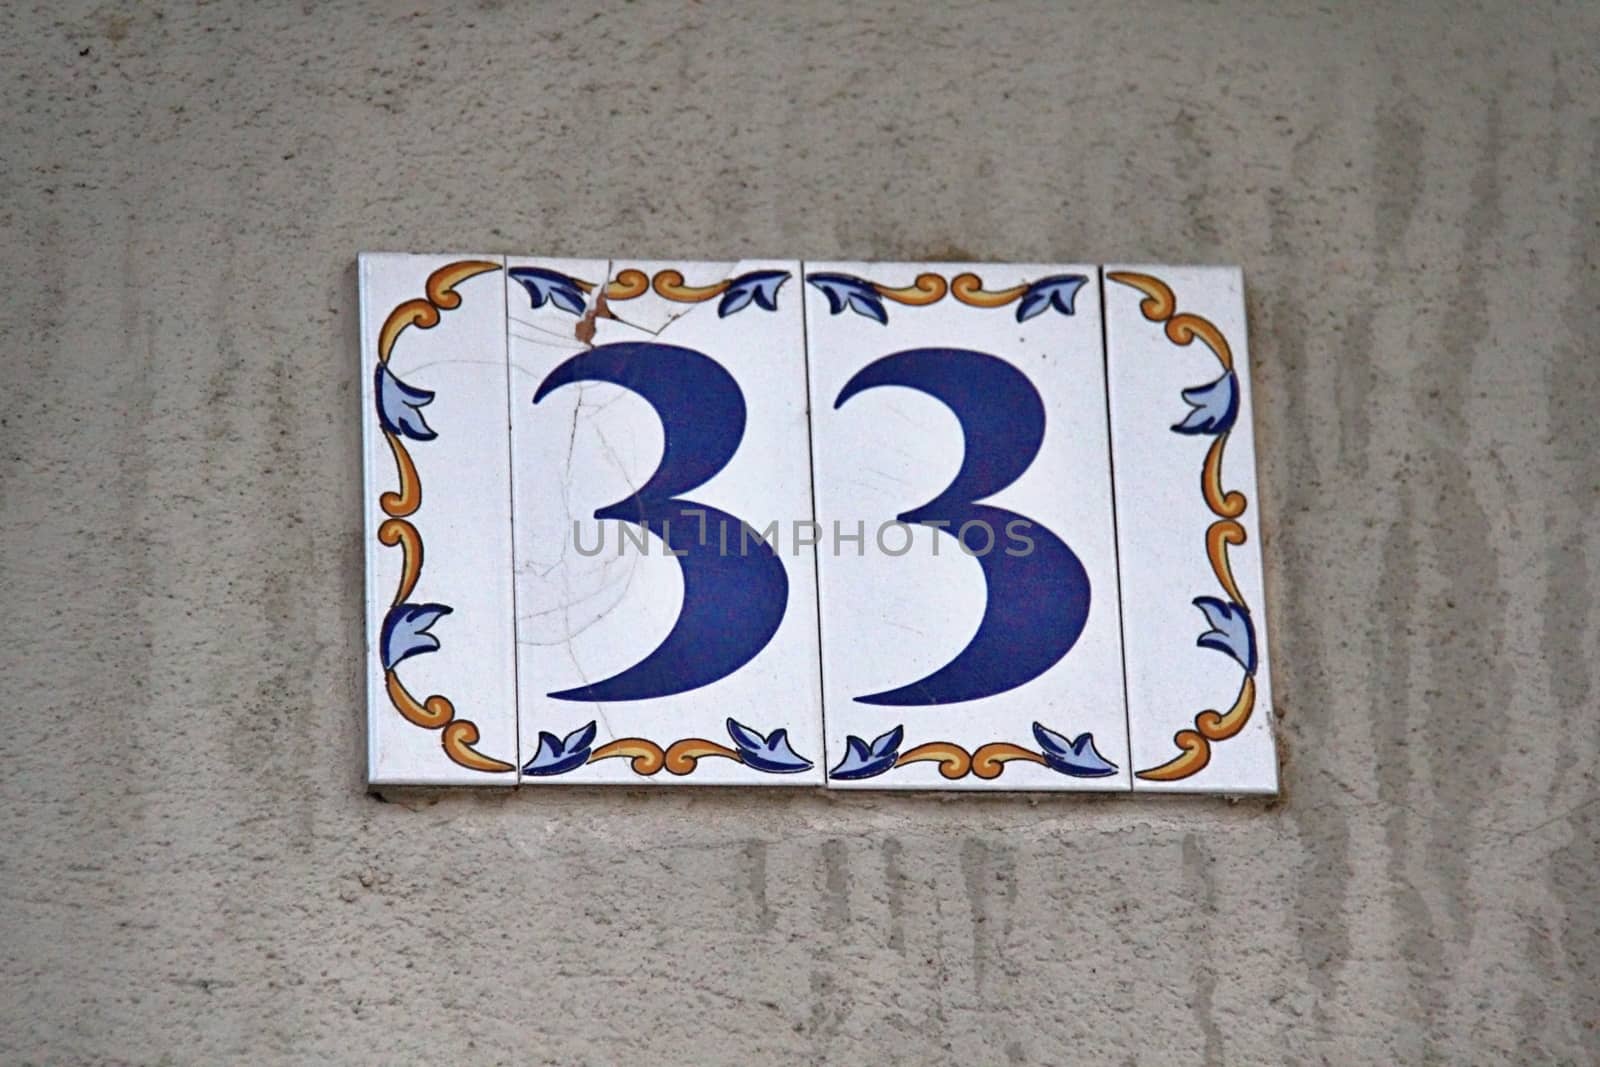 Photo of Building Identification Number made in the late Summer time in Spain, 2013